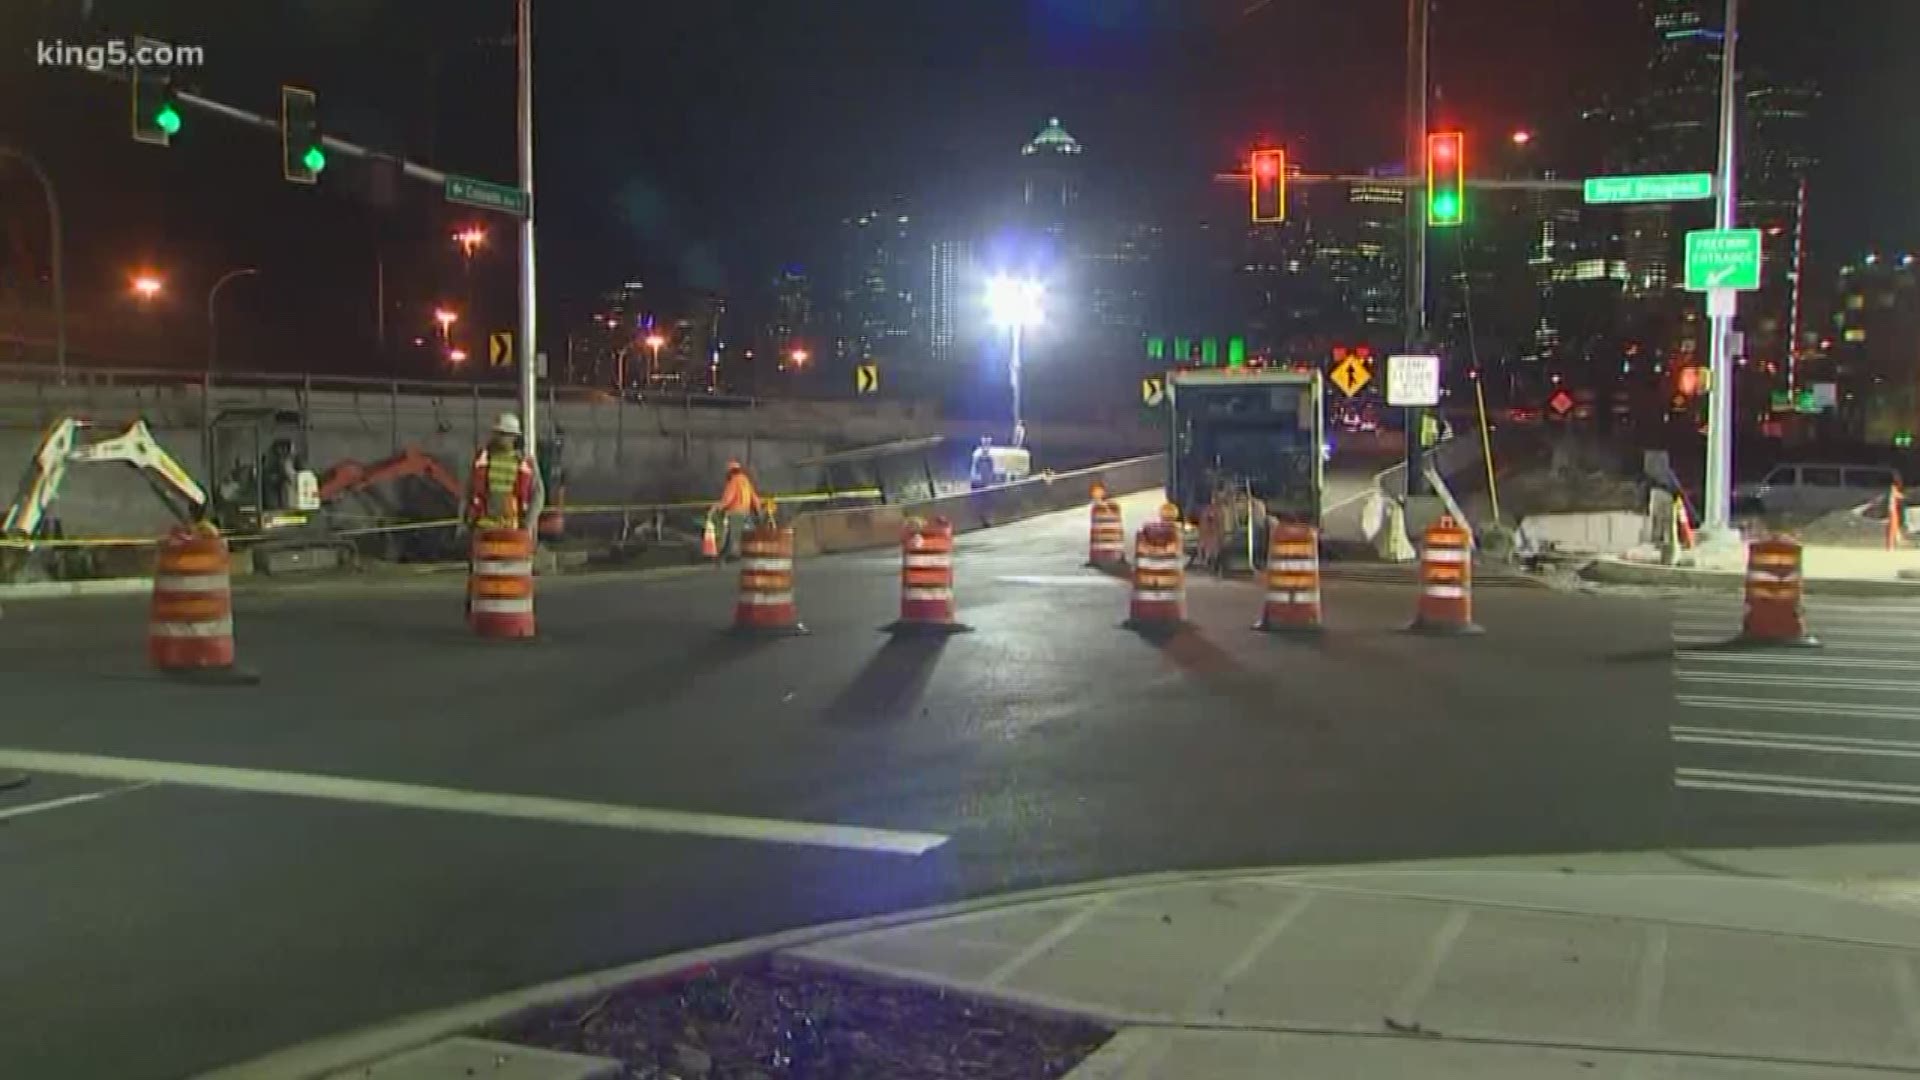 The SODO ramps along SR 99 are now closed for good. About 23,000 people use those ramps daily, according to WSDOT. KING 5's Natalie Swaby reports -